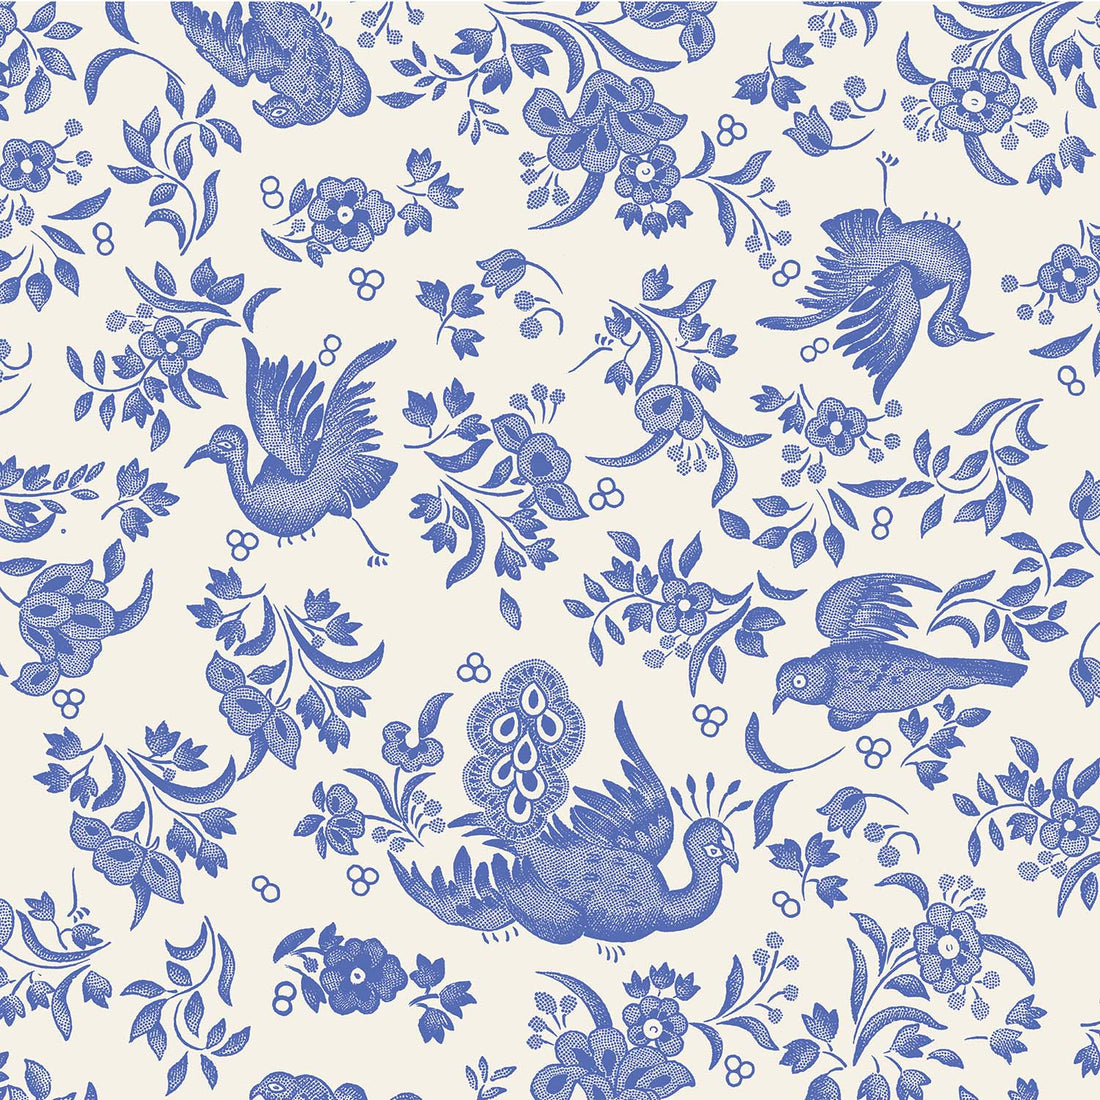 A Blue Regal Peacock pattern on Hester &amp; Cook napkins.